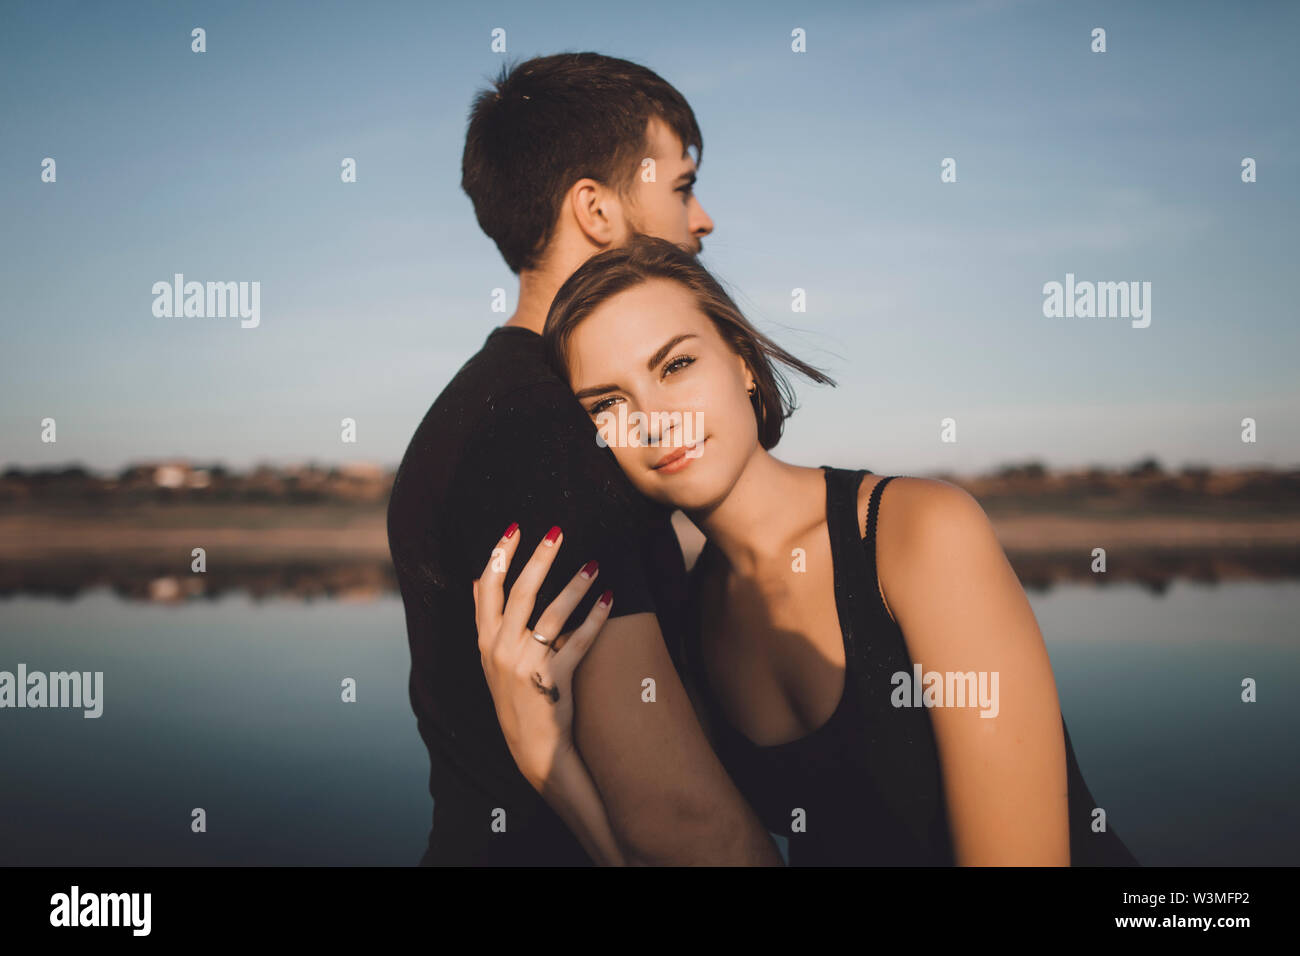 Young couple embracing by lake Stock Photo